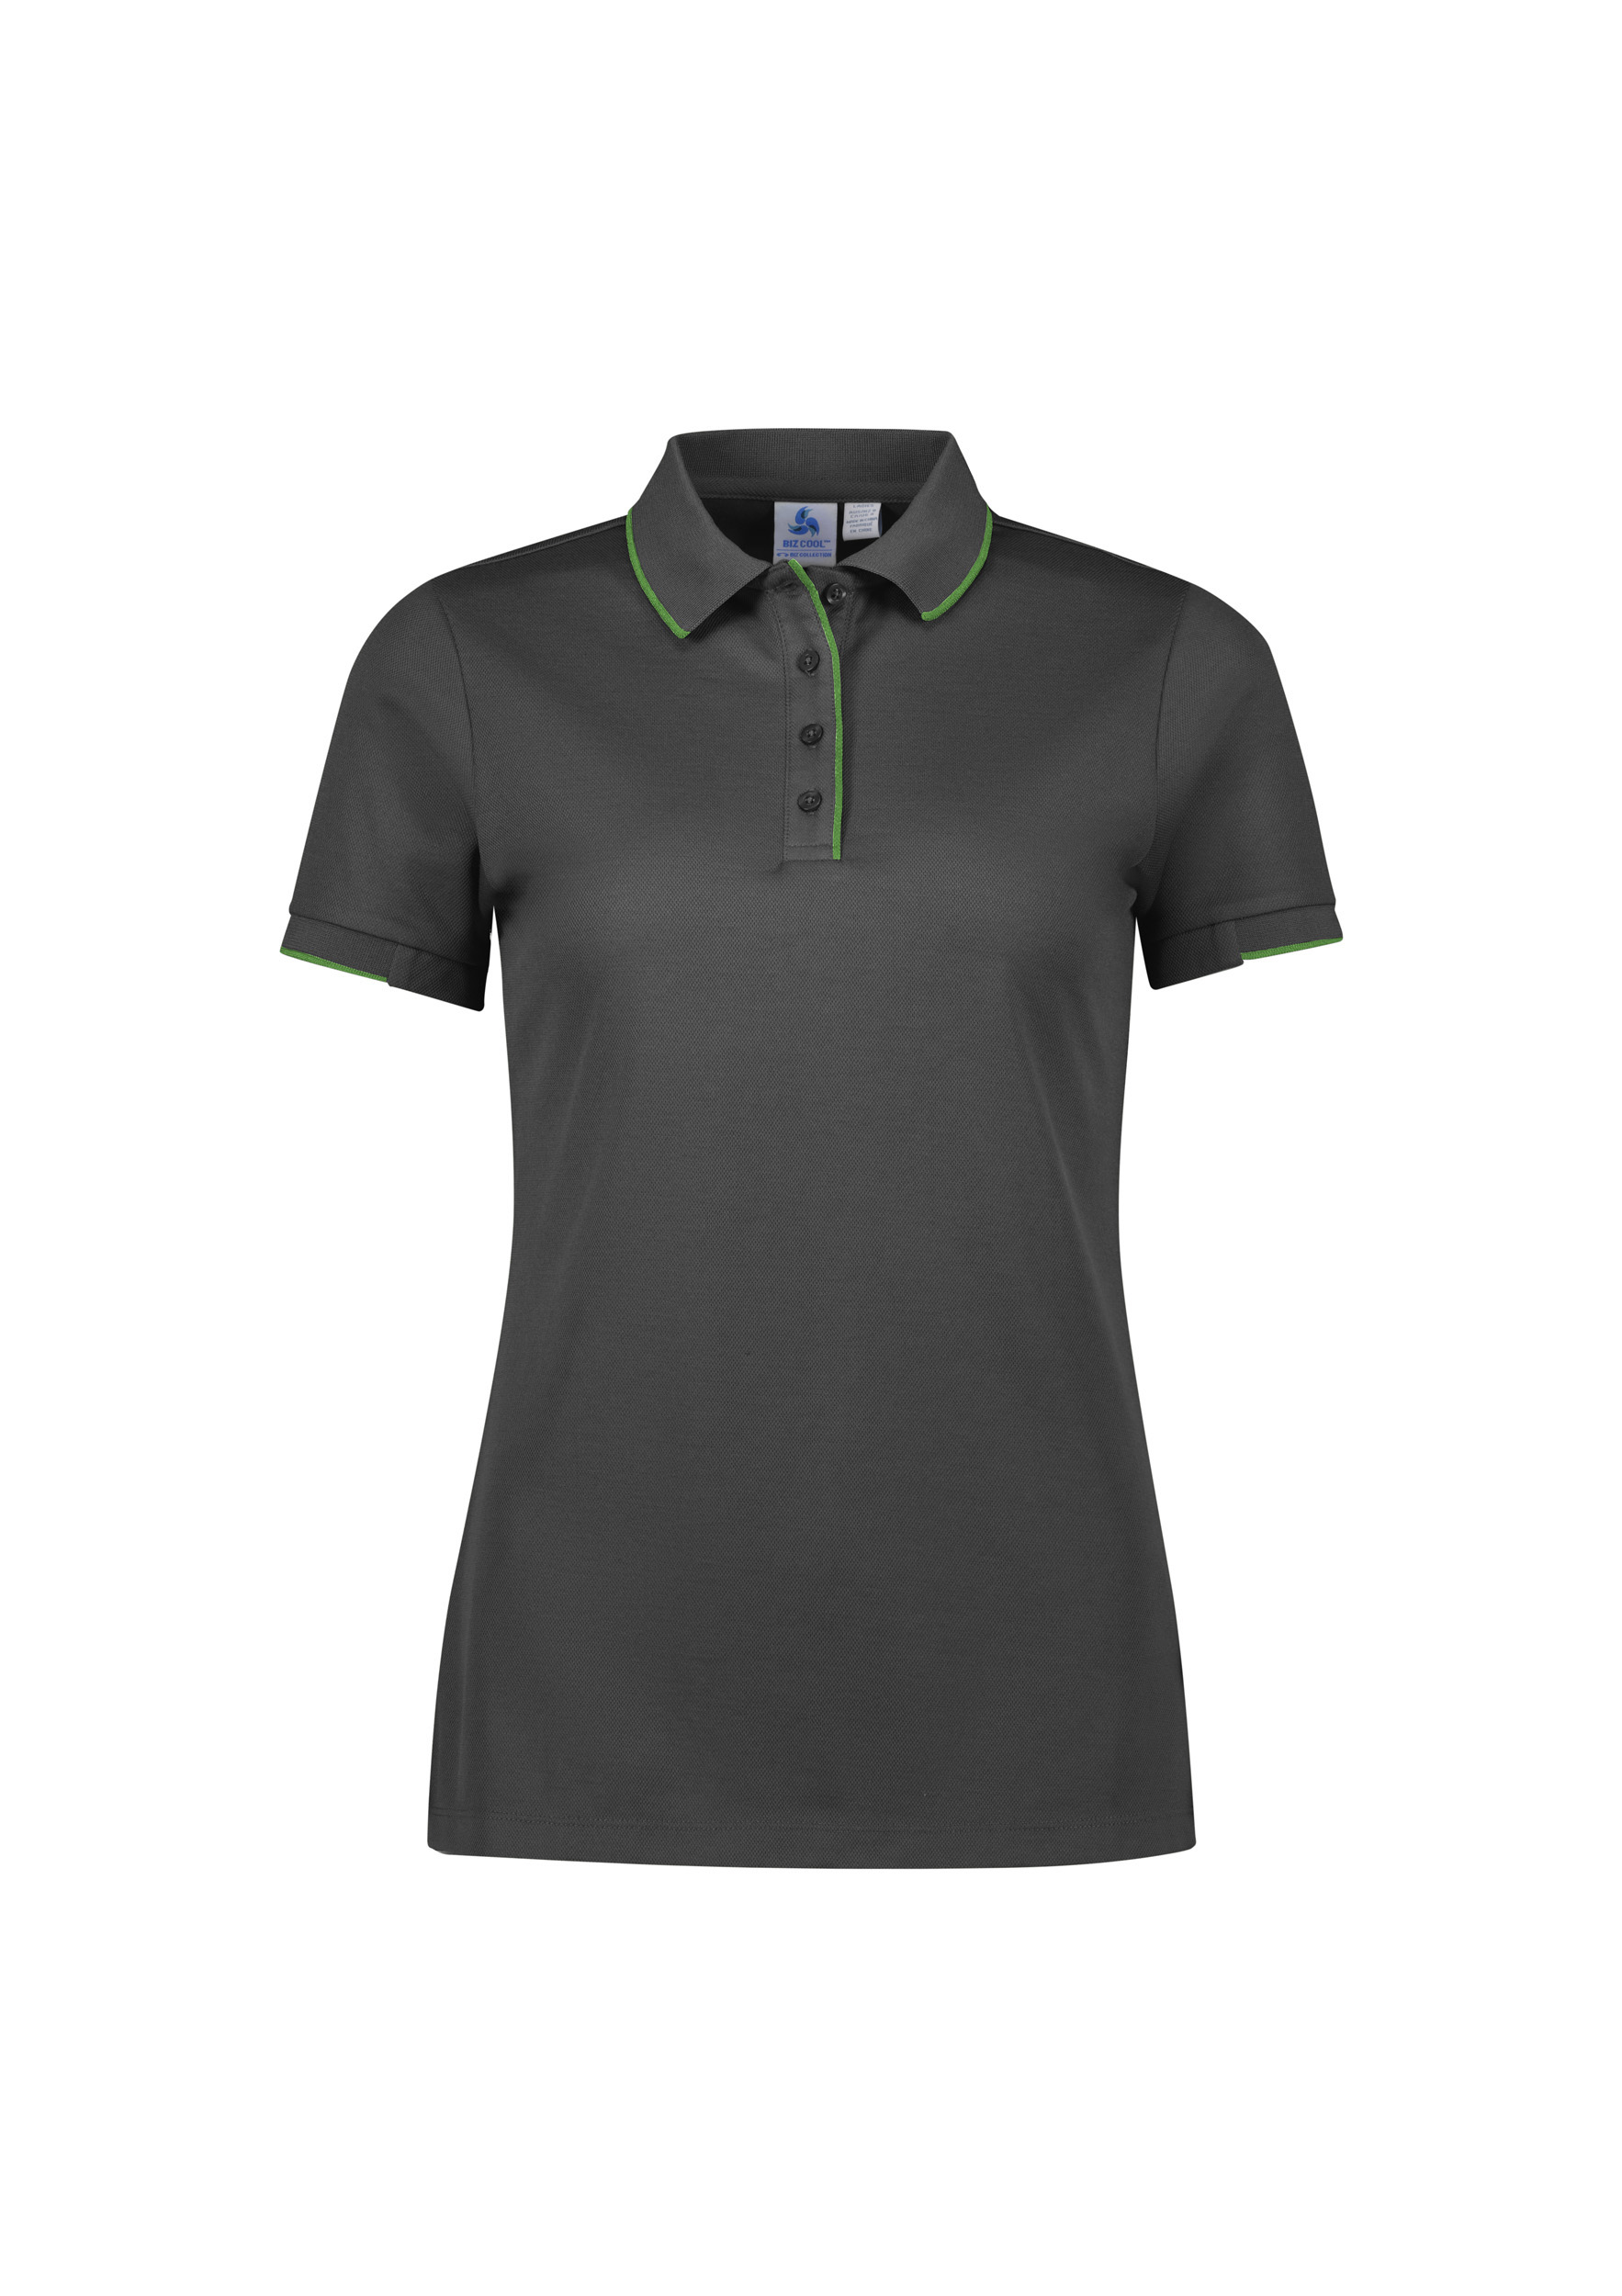 WOMENS FOCUS POLO GREY/FL.LIME 10 80% POLY, 20% COTTON-BACK 185GSM